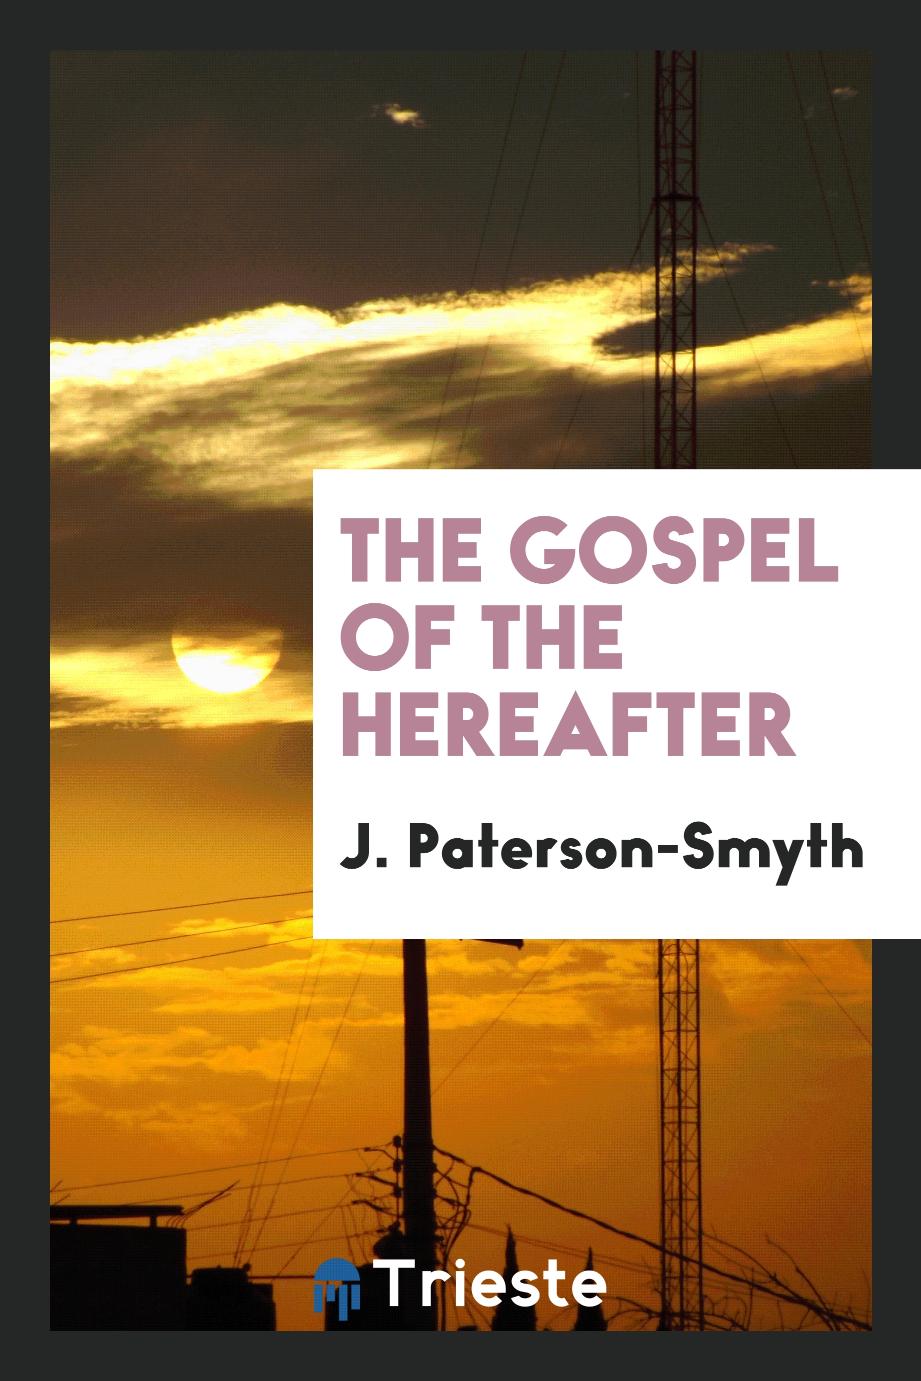 The gospel of the hereafter